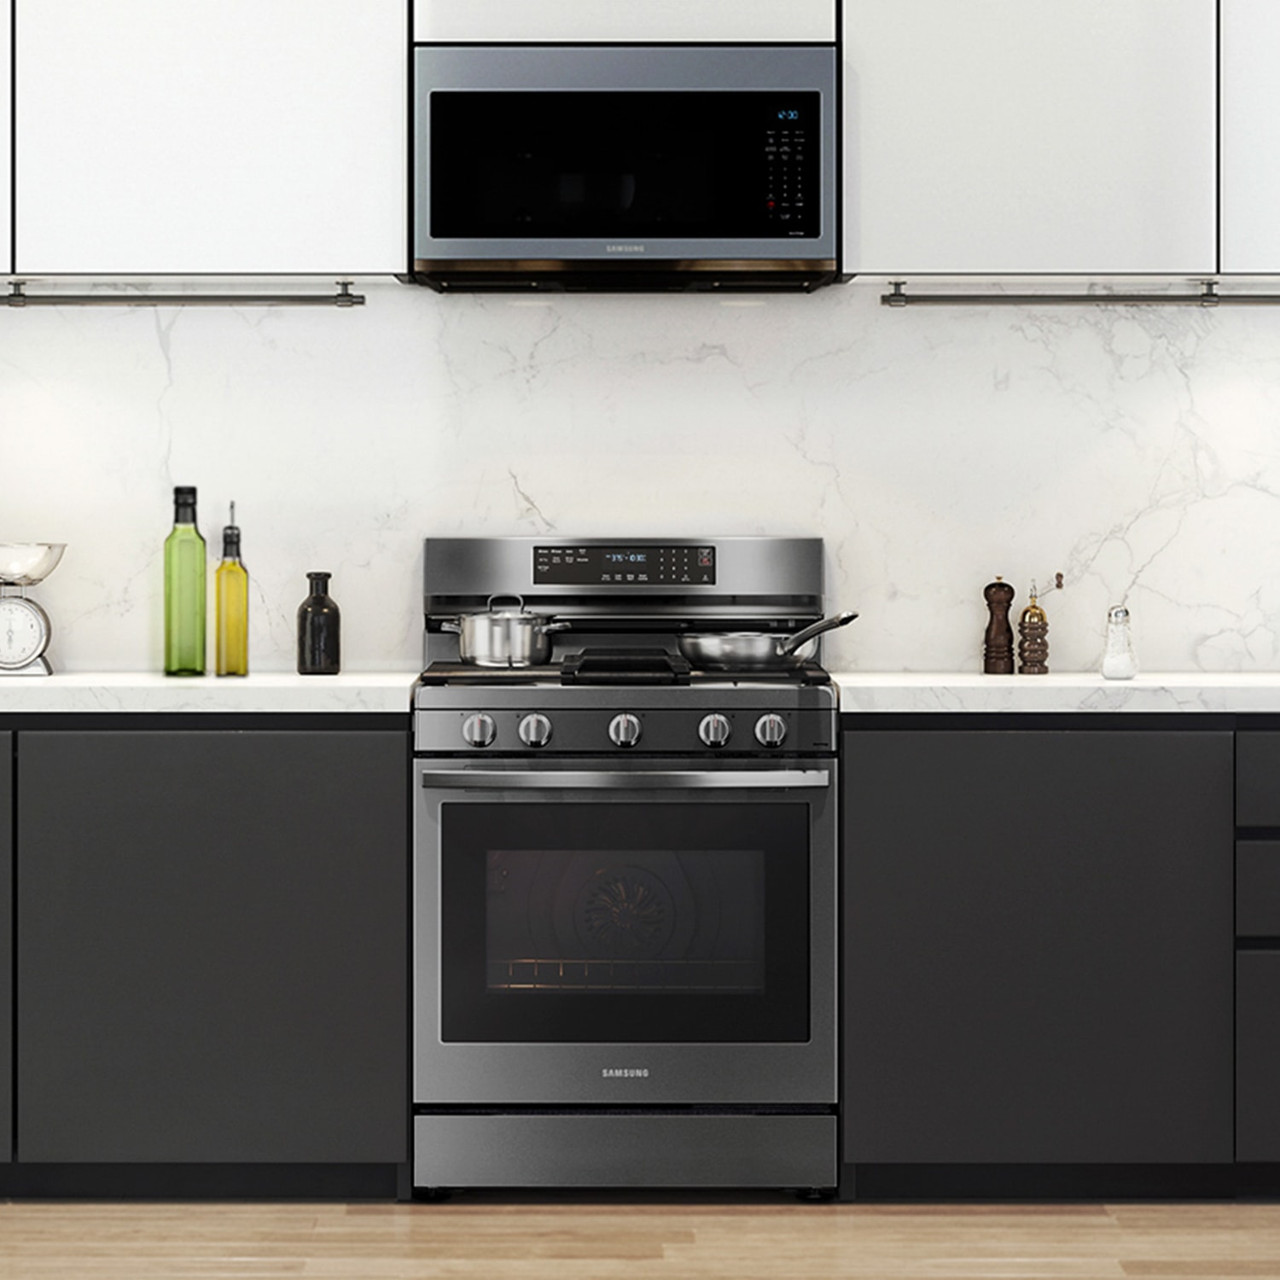 Samsung 6.0 cu. ft. Smart Gas Range w/ Air Fry, Convection+ & Stainless Cooktop - NX60A6711SG